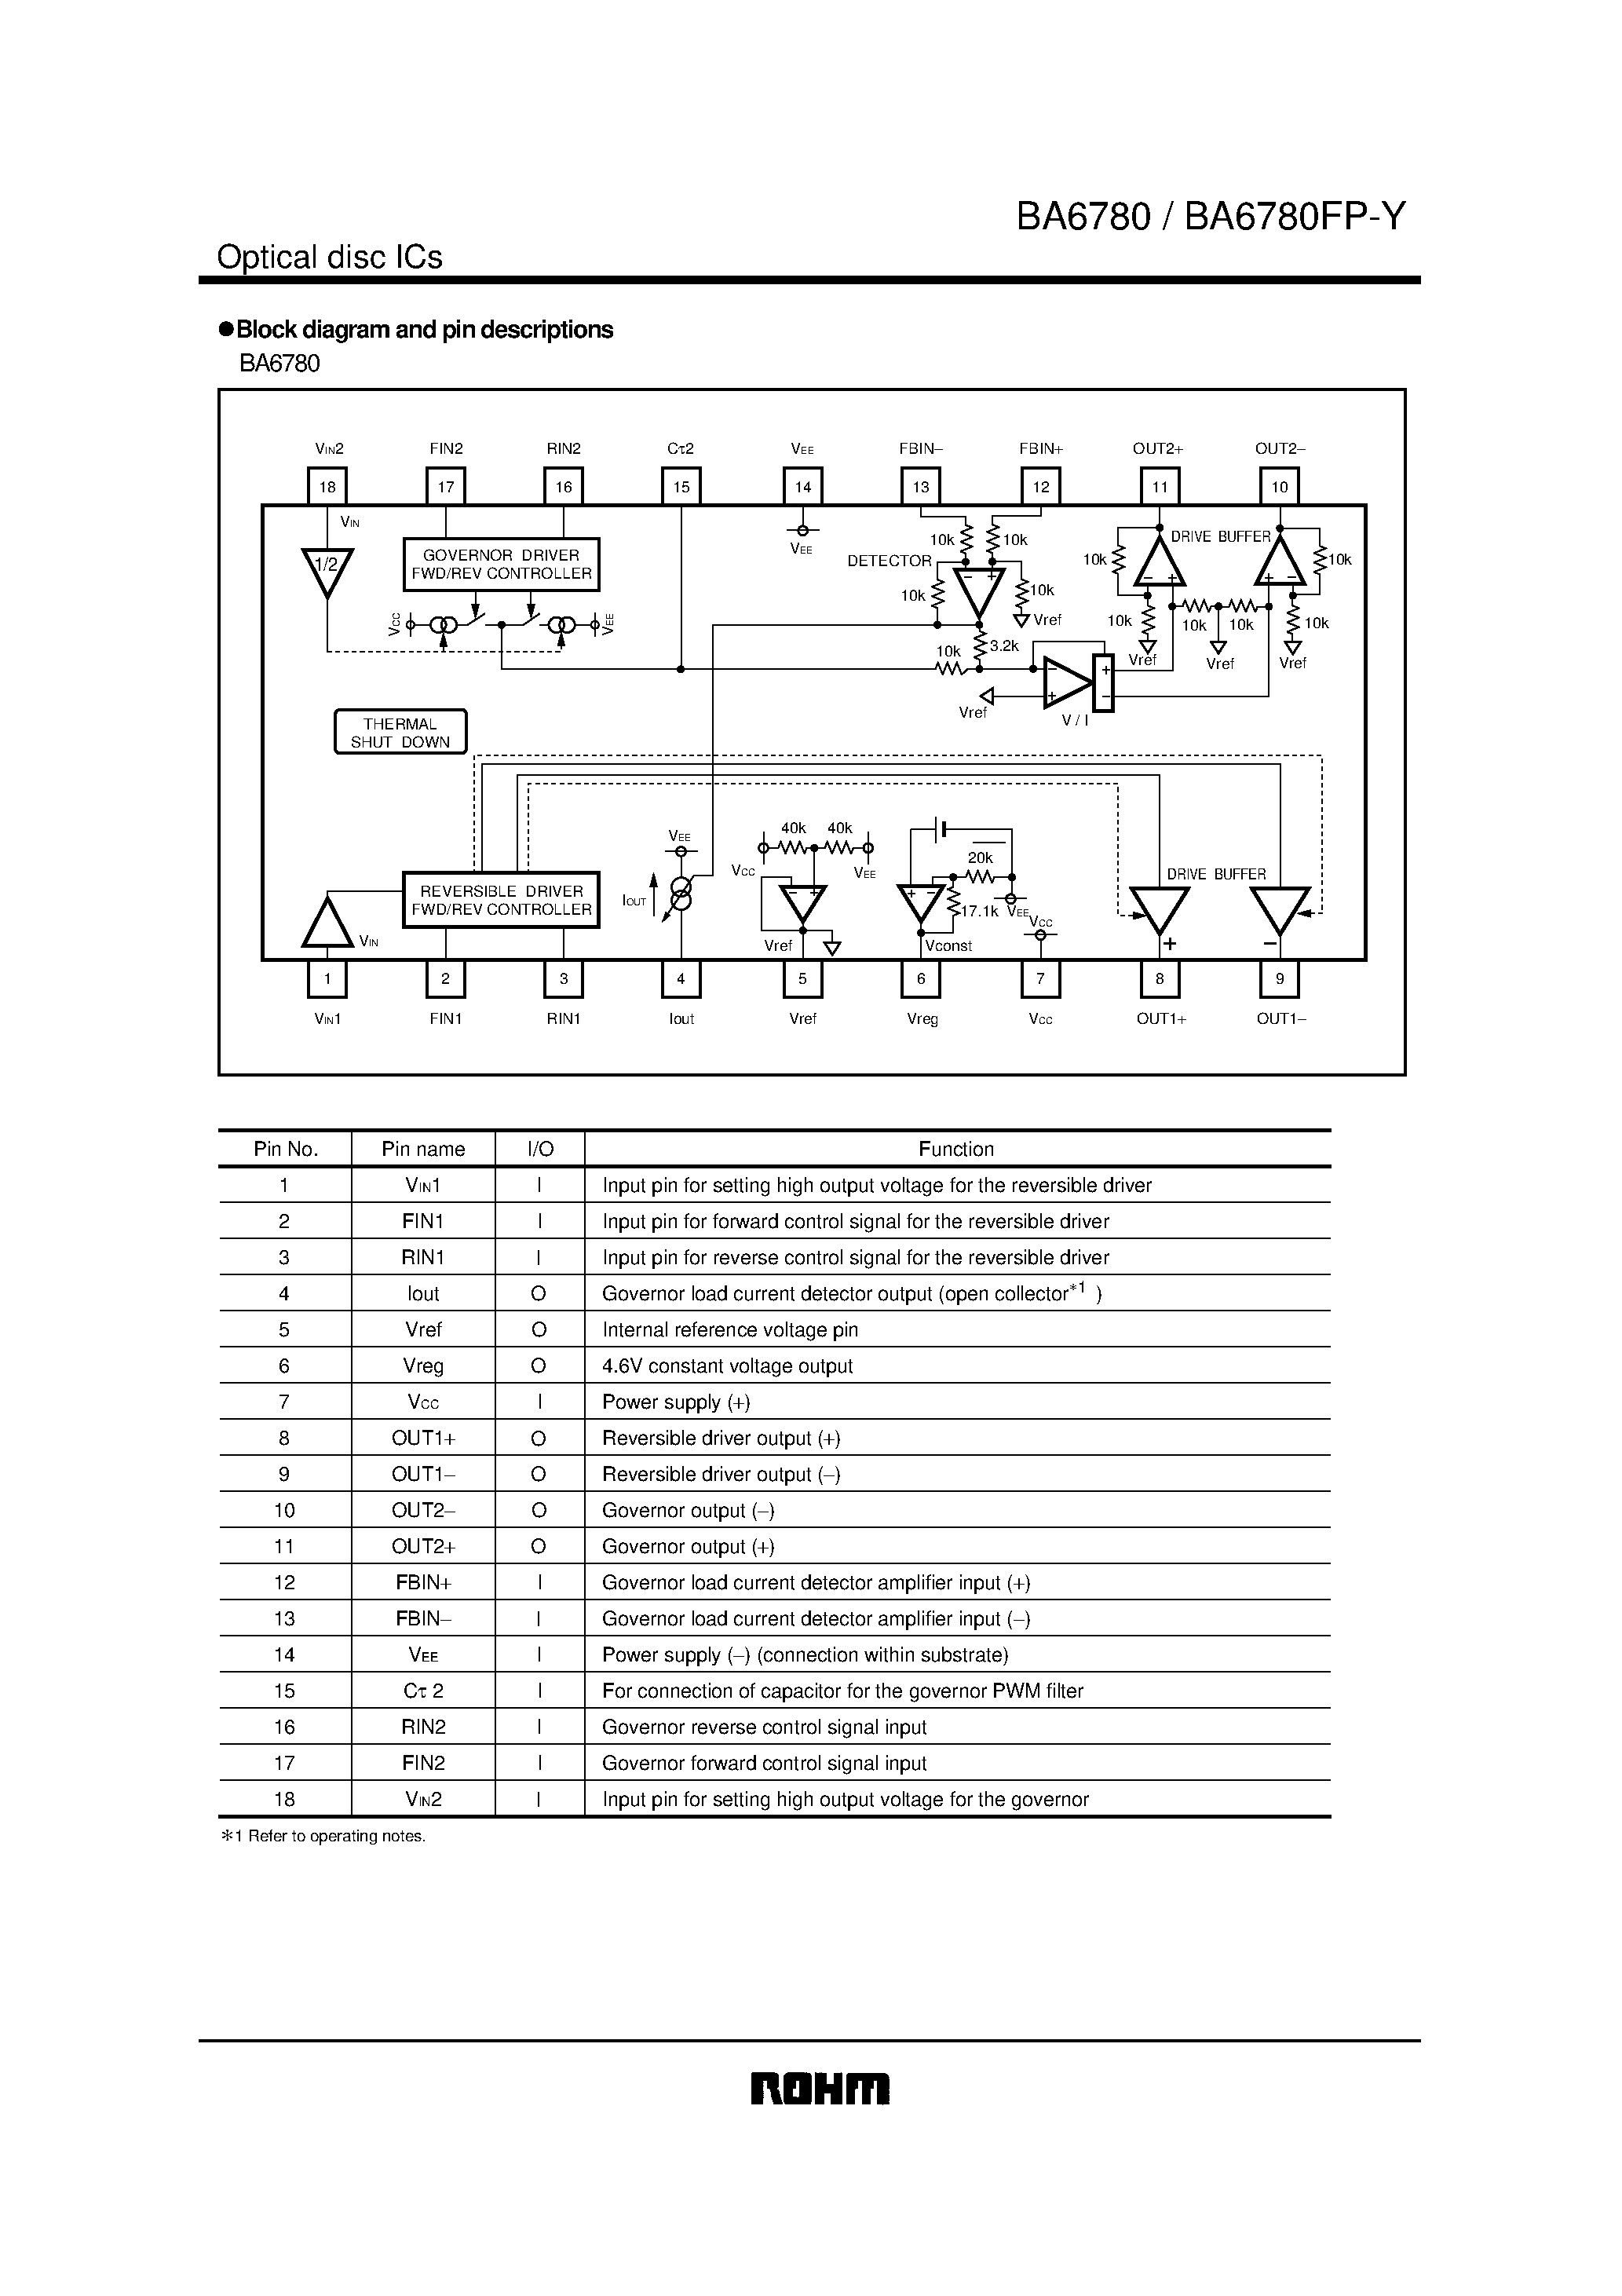 Datasheet BA6780FP-Y - 2-channel driver for CD changers page 2